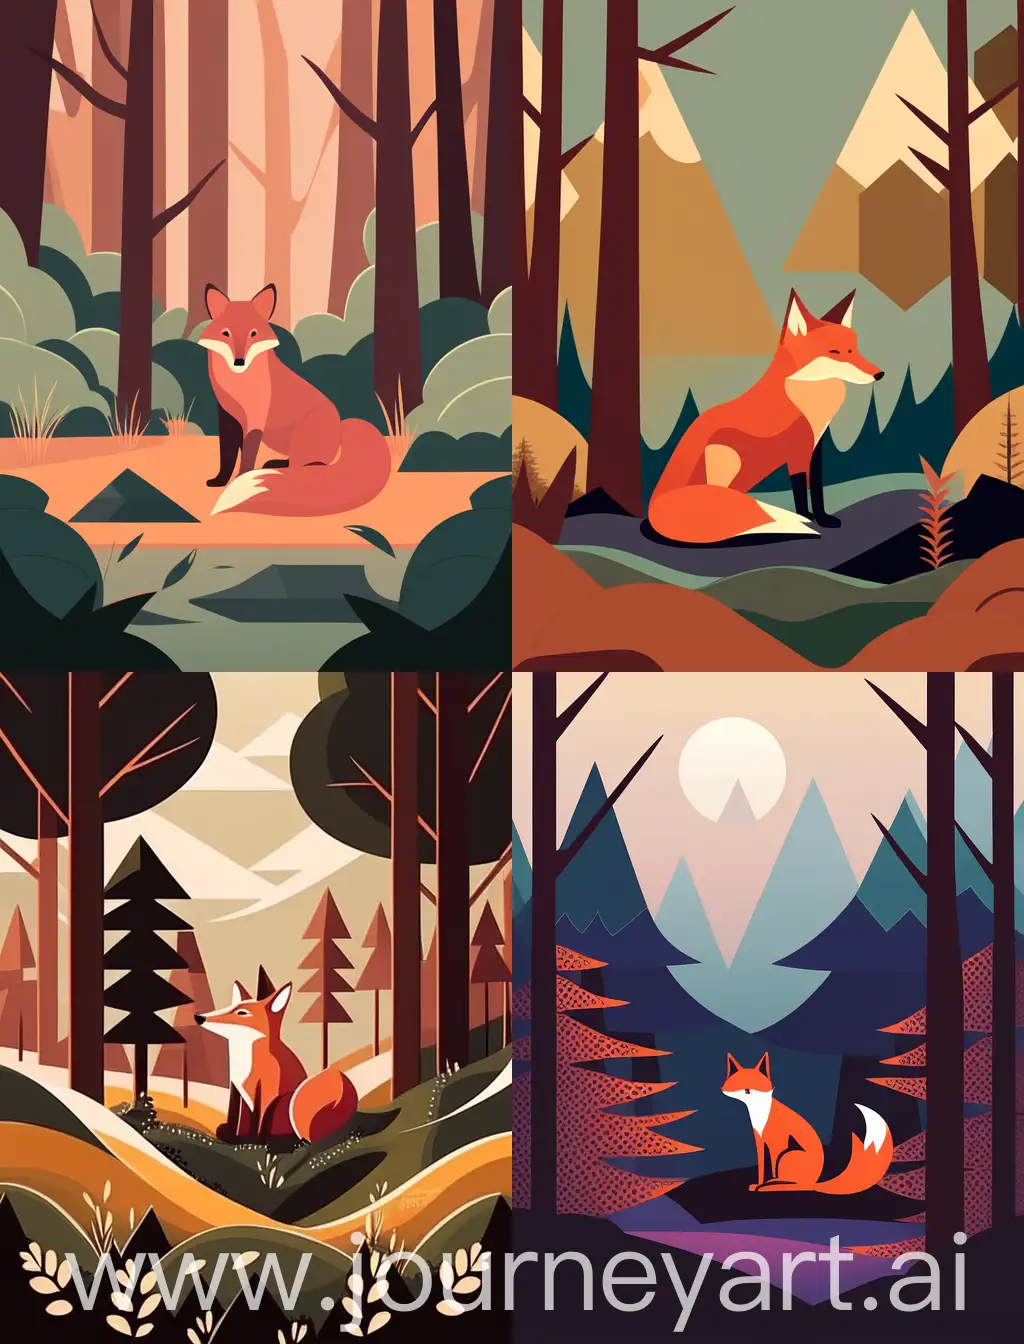 A flat vector illustration of a fox sitting on the ground, sharp and angular shapes, earthy and muted tones, forest environment with stylized trees and bushes, mysterious and tranquil ambiance, illustration, vector drawing in Adobe Illustrator, 